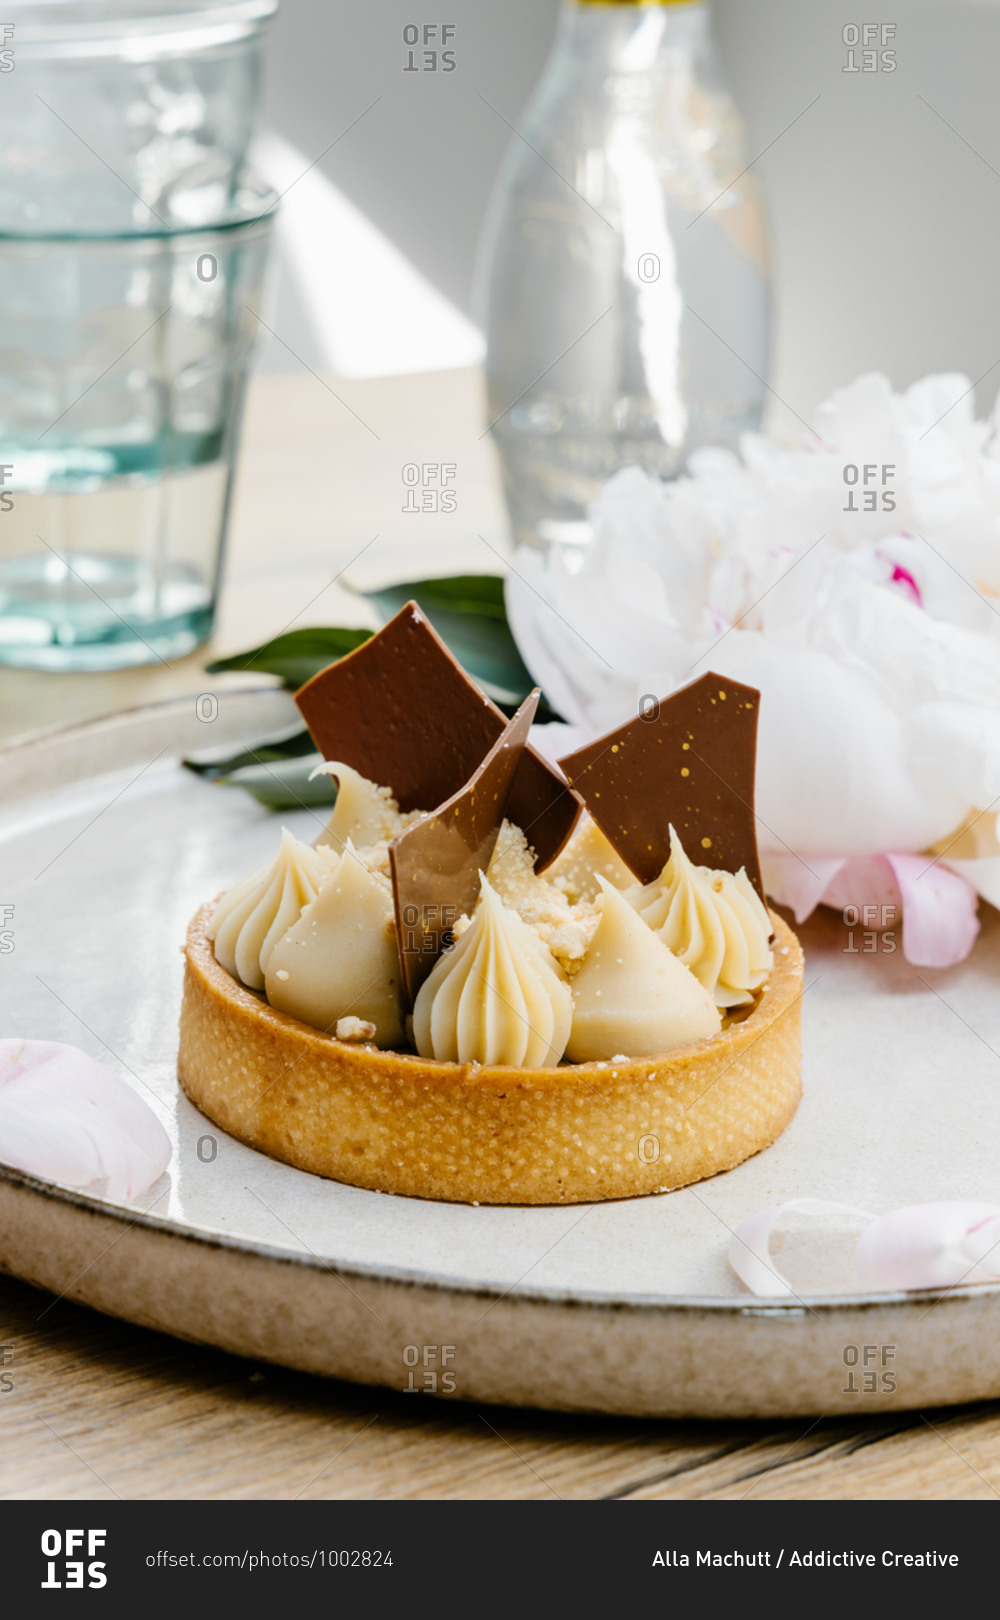 High angle of palatable caramel tart garnished with white and milk chocolate and placed on tray with peony flowers